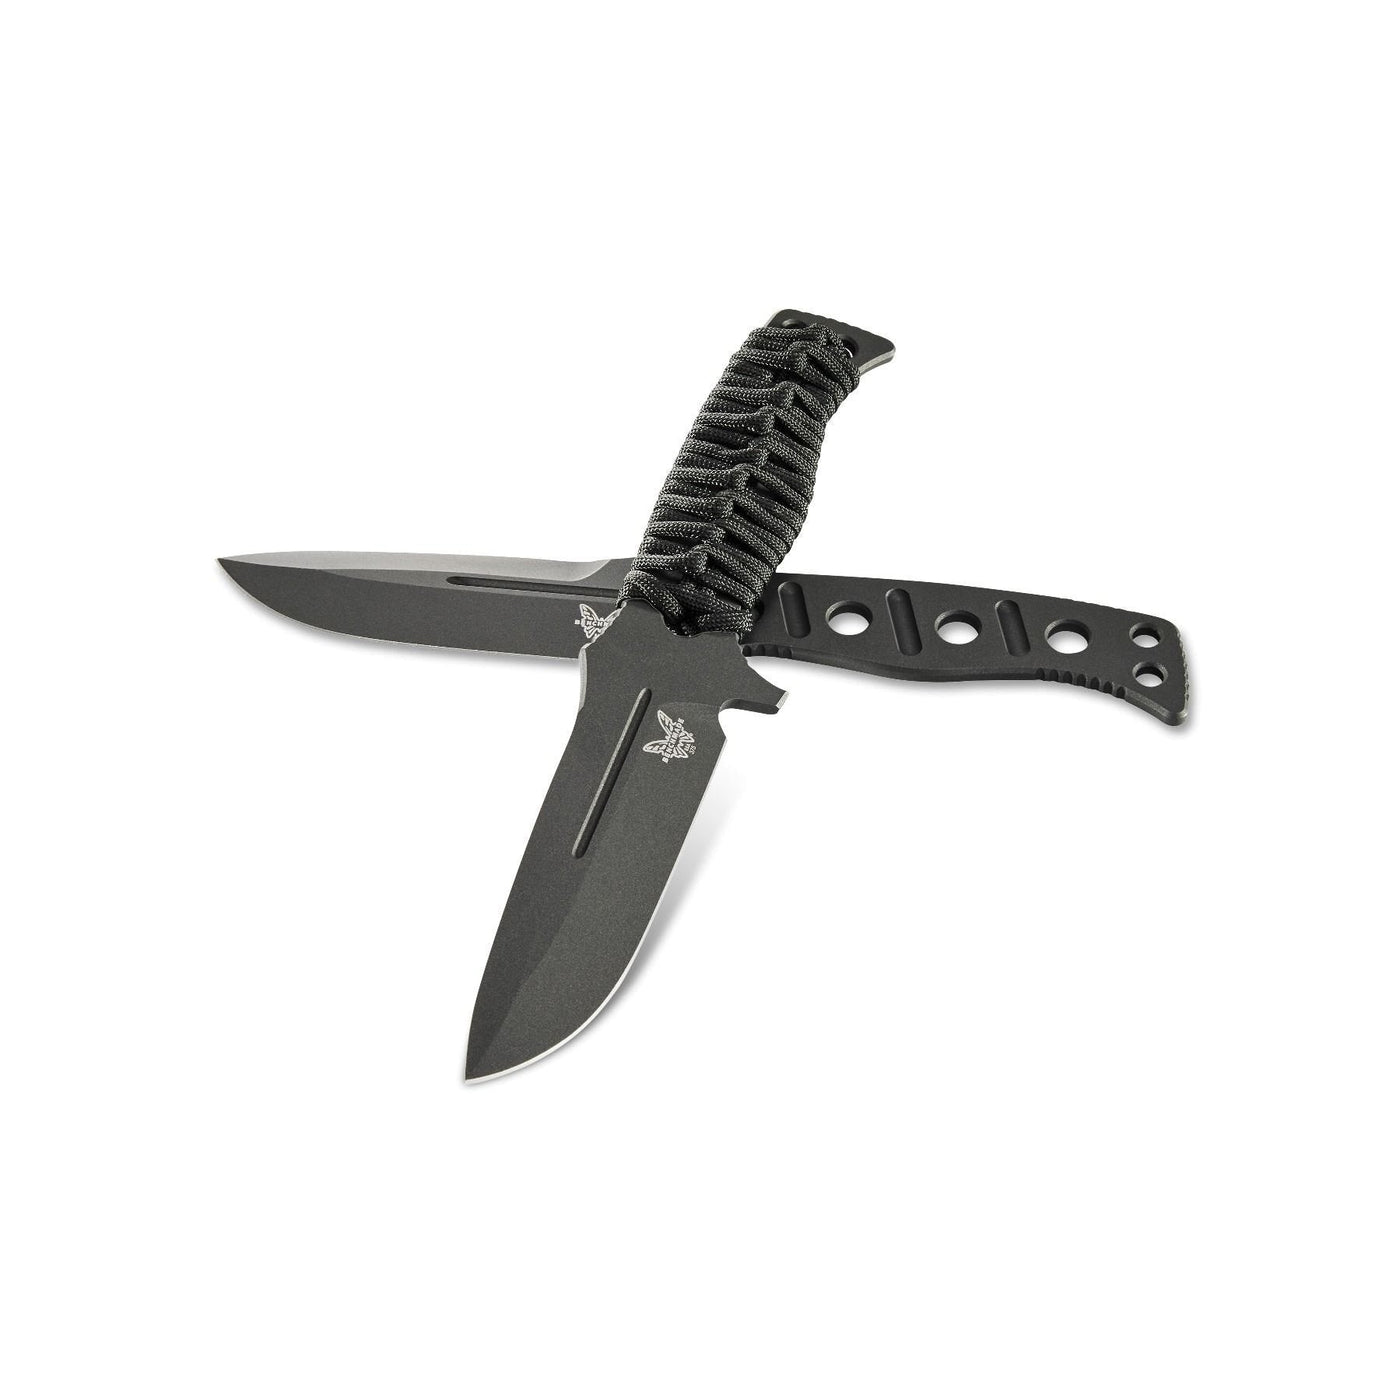 Benchmade Fixed Adamas Knife-Knives & Tools-Kevin's Fine Outdoor Gear & Apparel